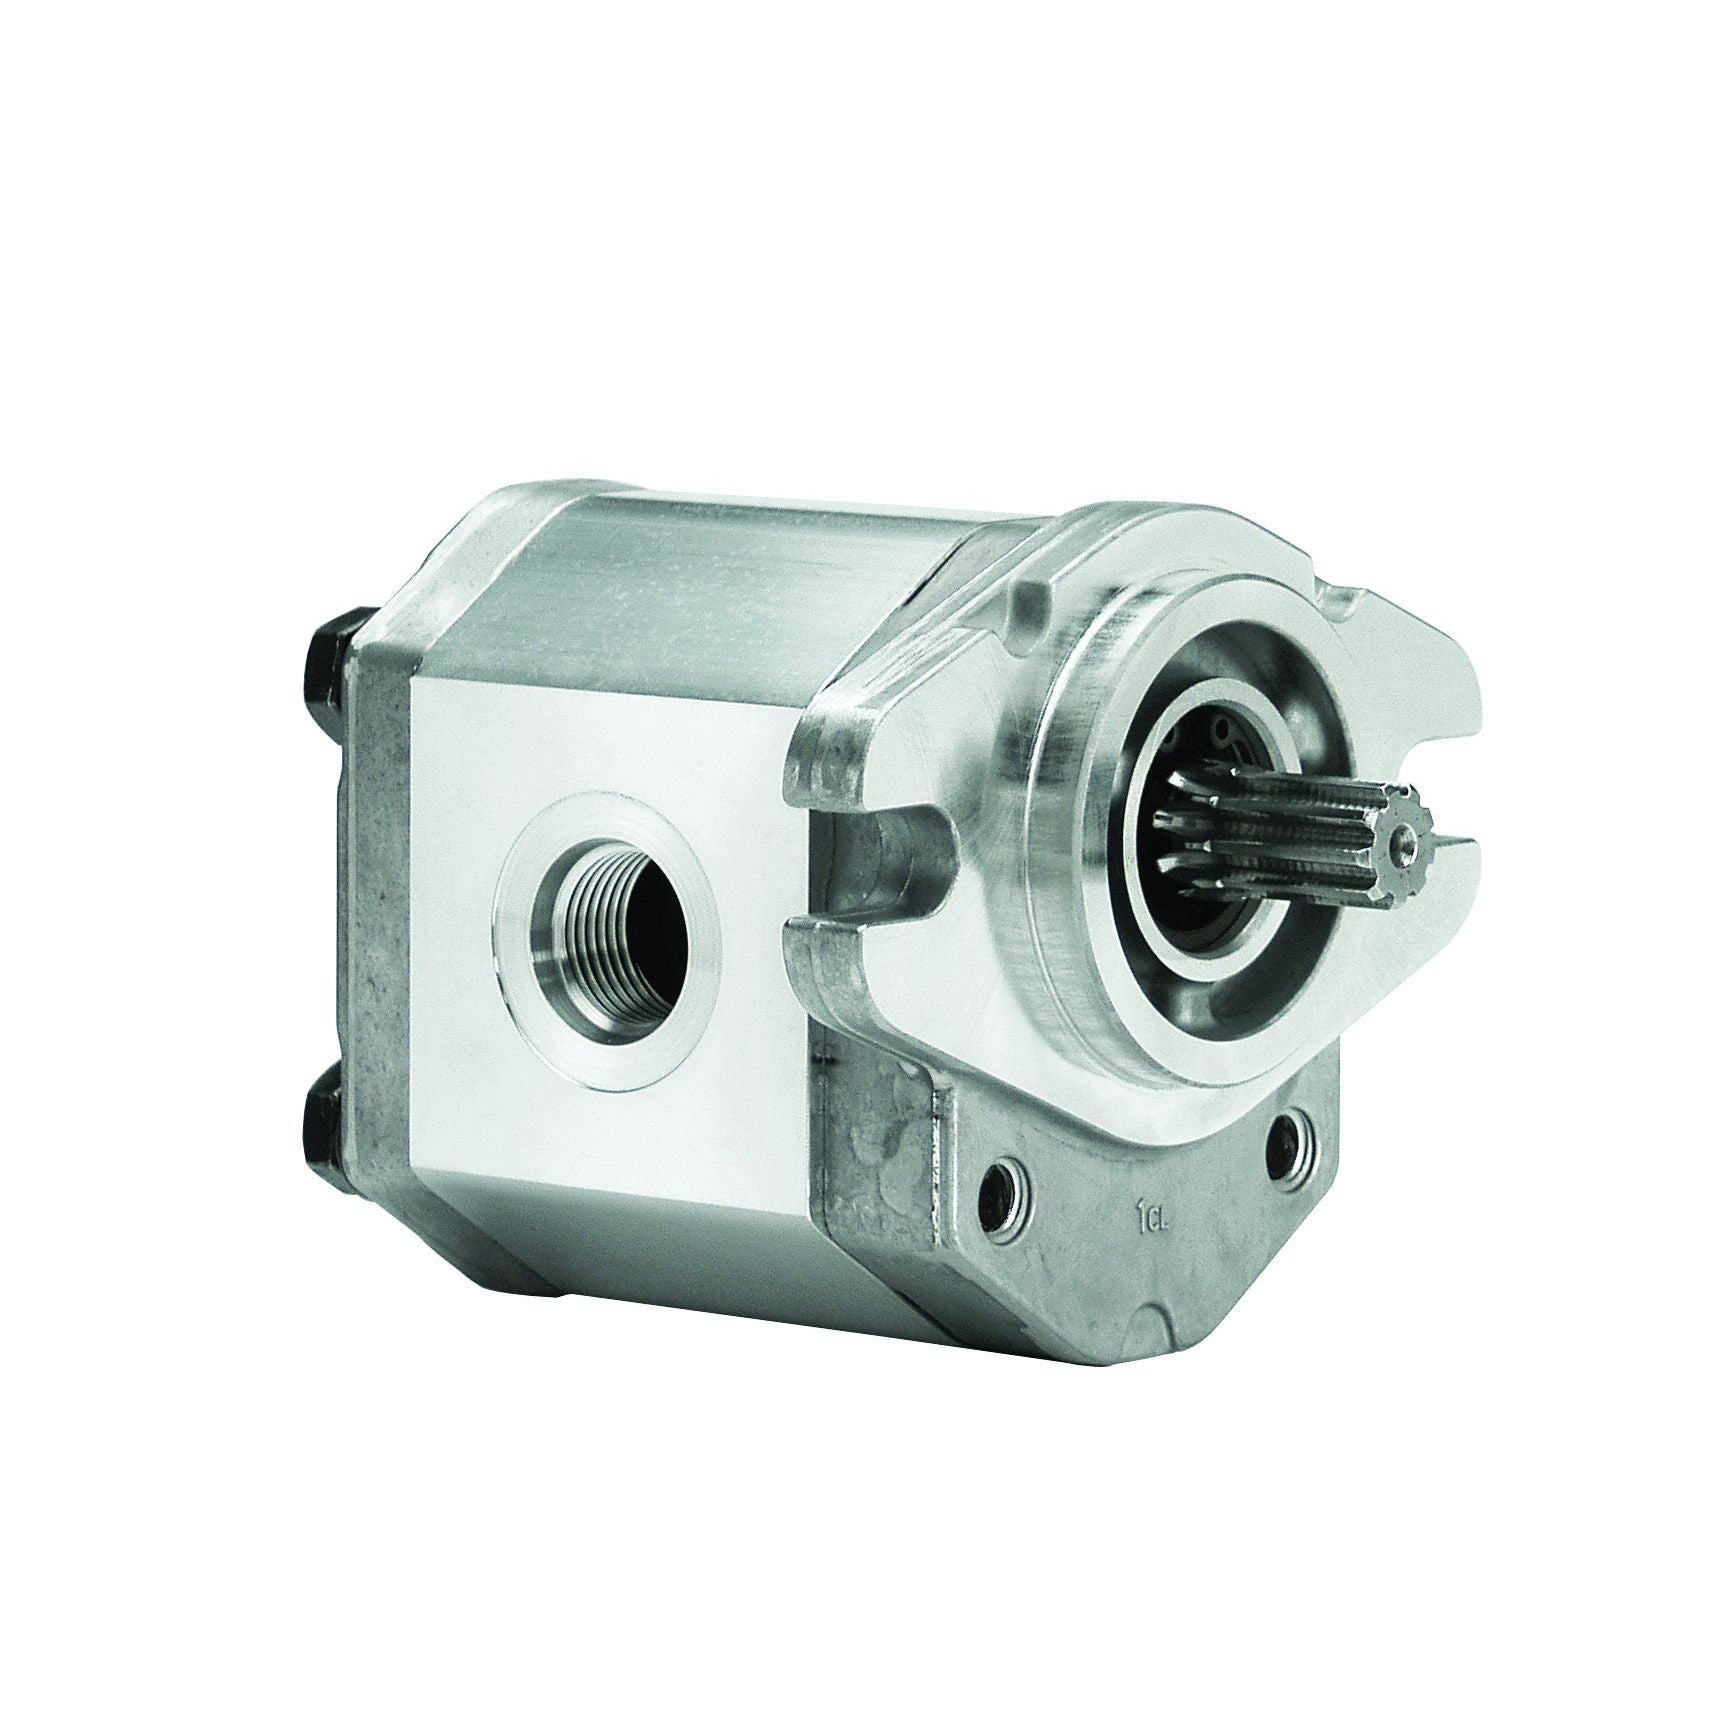 ALP2A-D-25-S1 : Marzocchi Gear Pump, CW, 17.9cc (1.0919in3), 8.51 GPM, 3045psi, 2500 RPM, #12 SAE (3/4") In, #10 SAE (5/8") Out, Splined Shaft 9T 16/32DP, SAE A 2-Bolt Mount